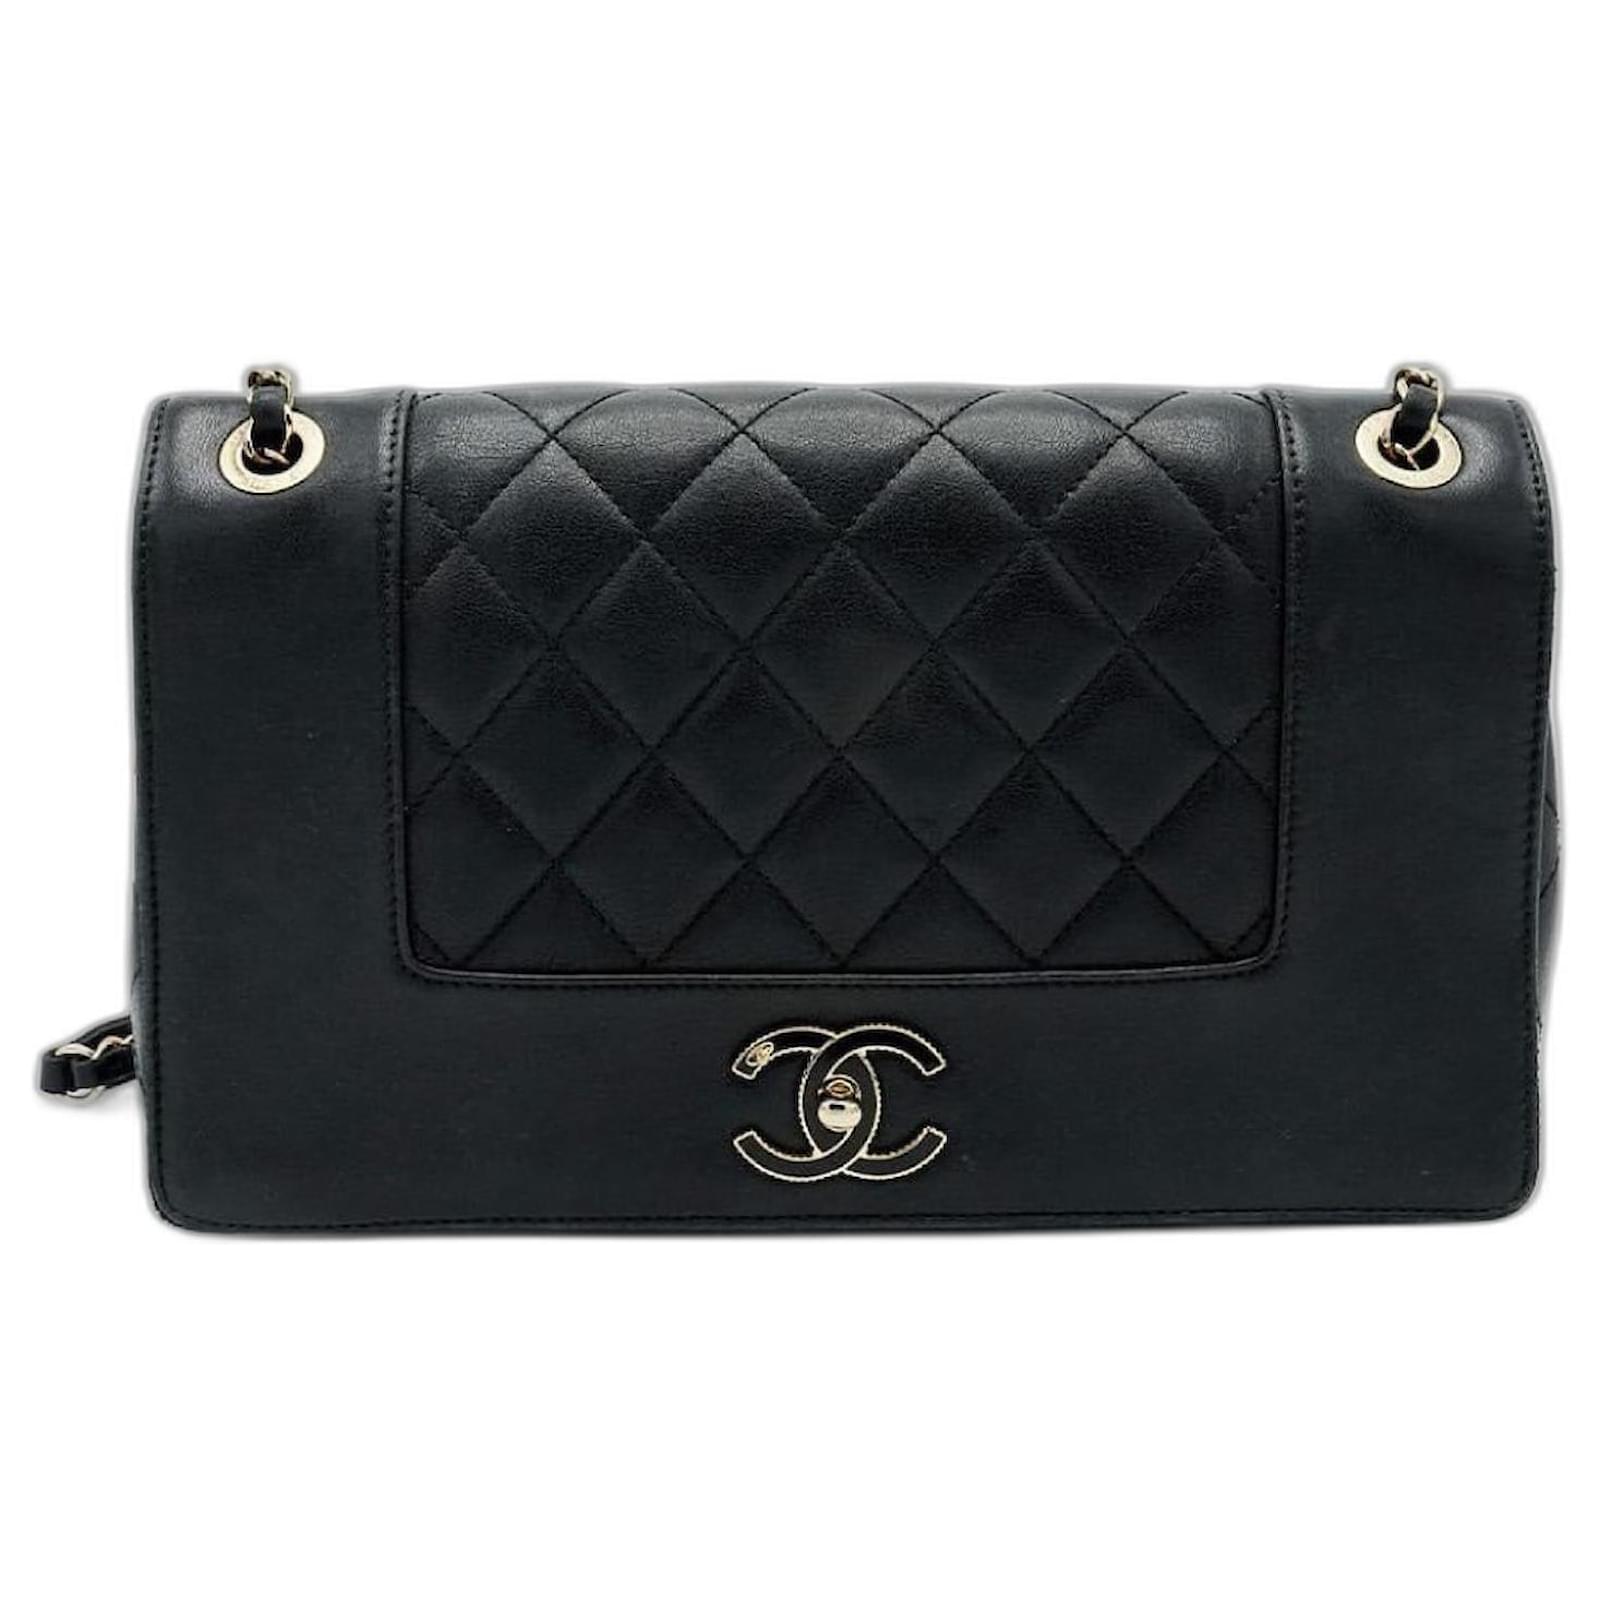 Chanel Black Soft Quilted Sheepskin Leather Large Vintage Mademoiselle  Classic Timeless Classic Flap Bag with Gold Hardware